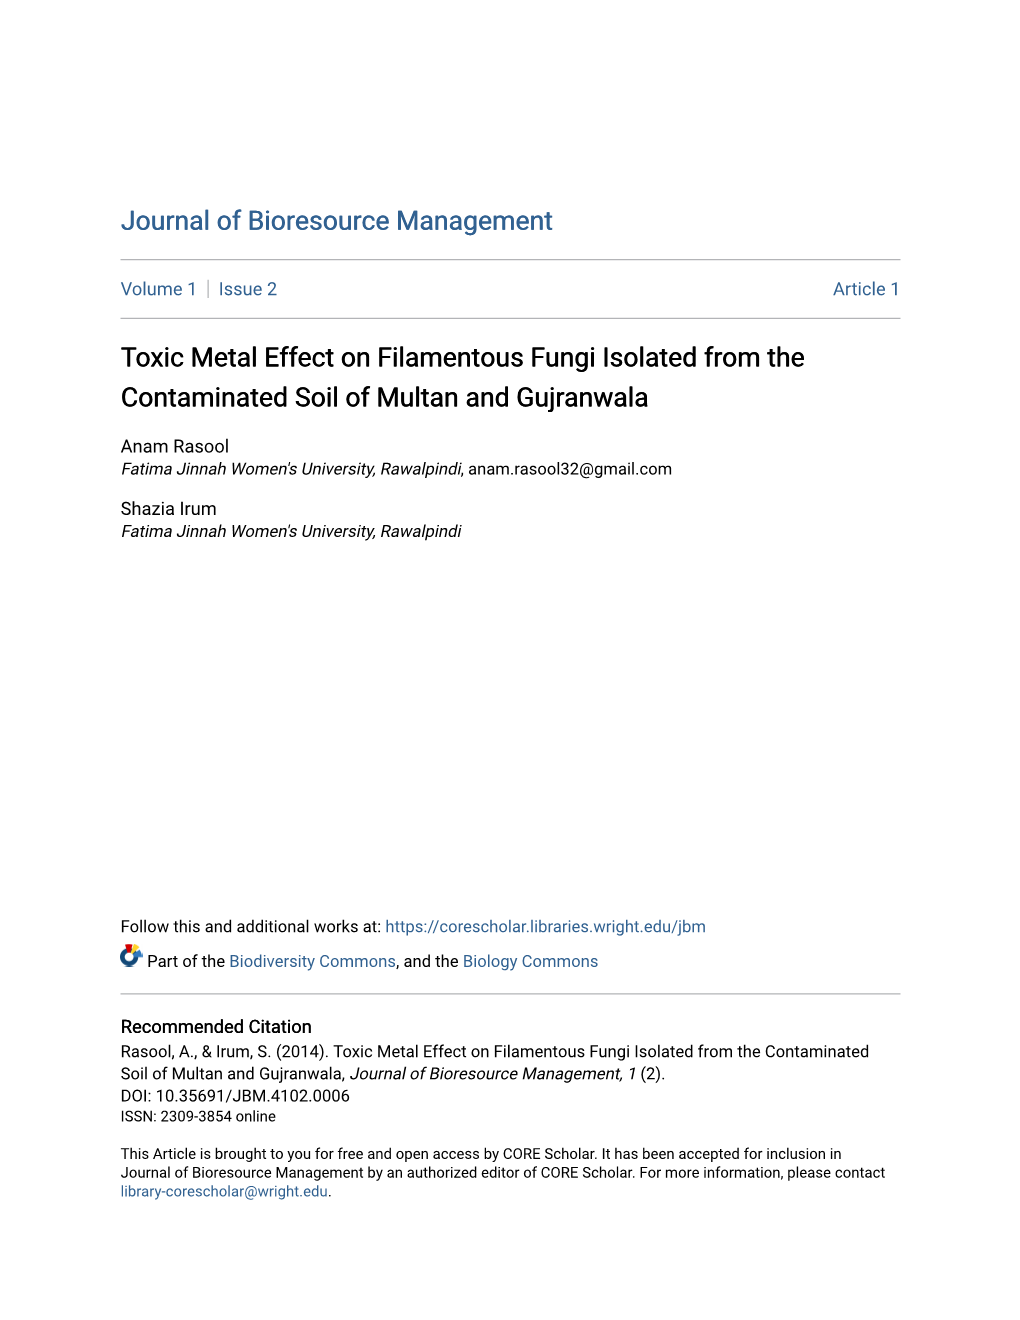 Toxic Metal Effect on Filamentous Fungi Isolated from the Contaminated Soil of Multan and Gujranwala